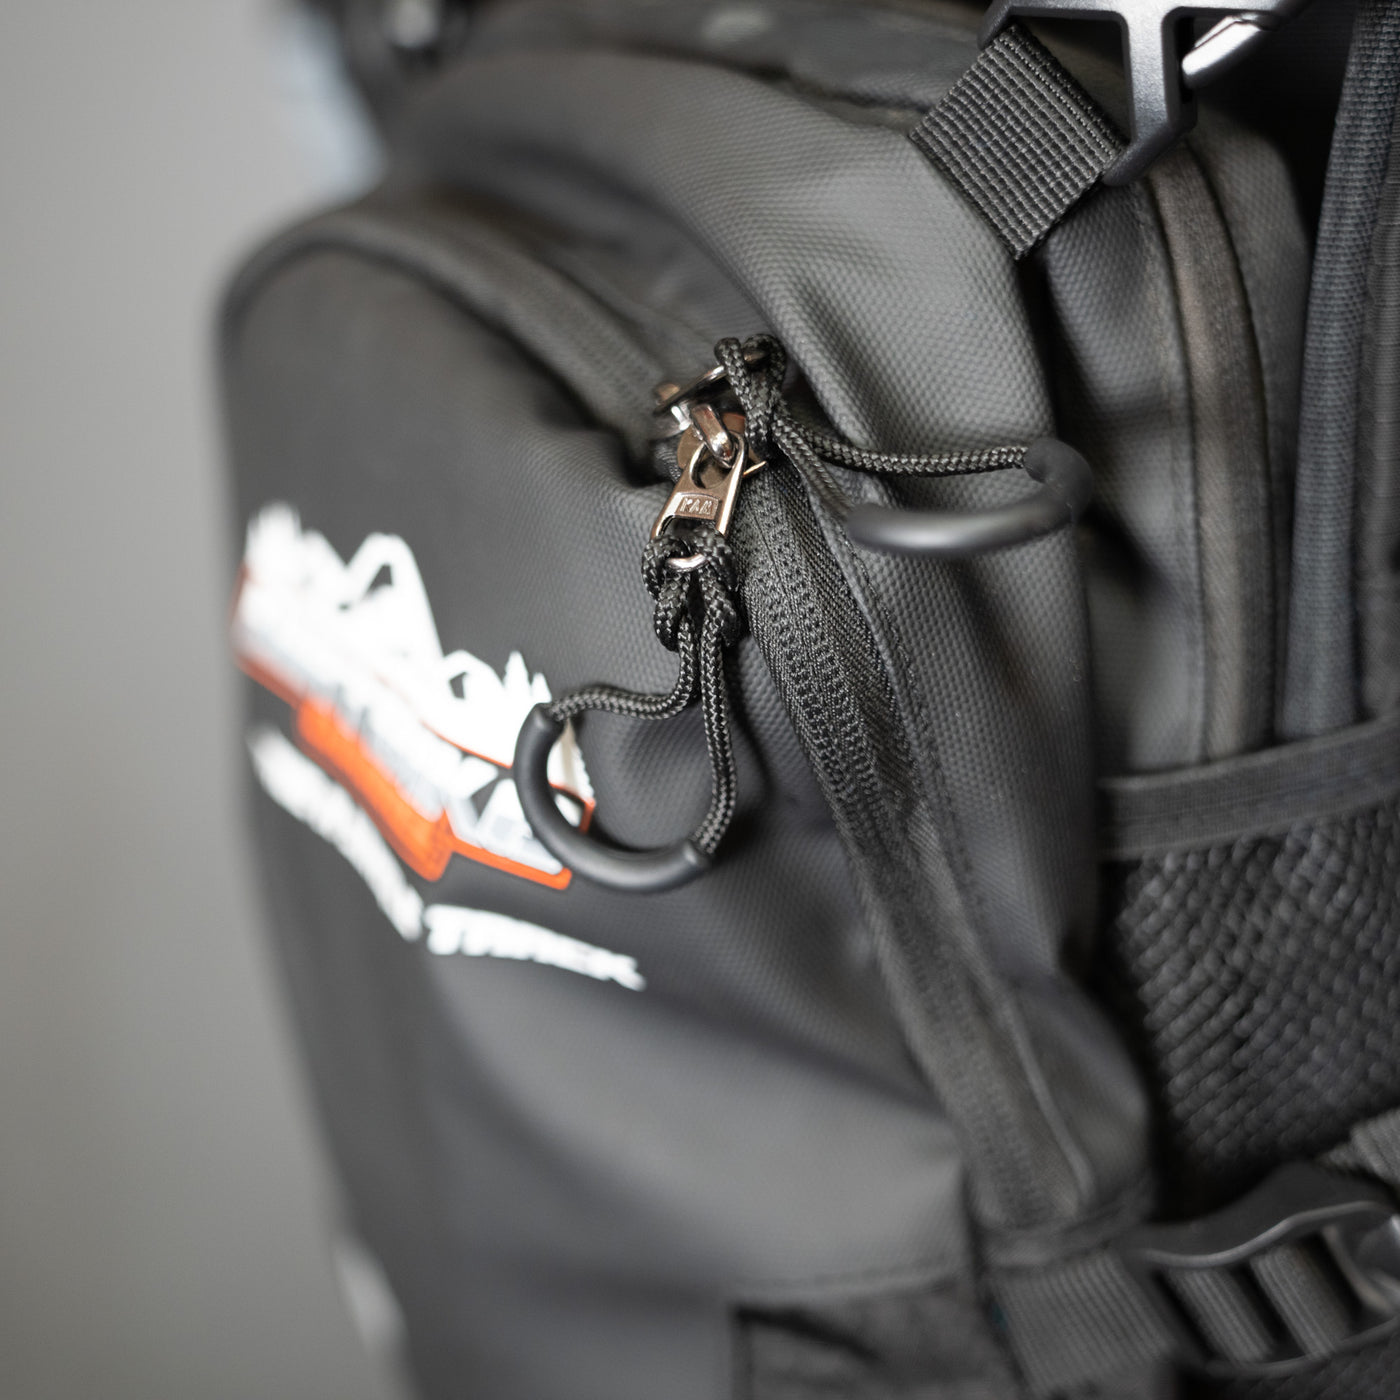 DBC Enduro Riding Pack (with tool organizer included) - Stealth Black